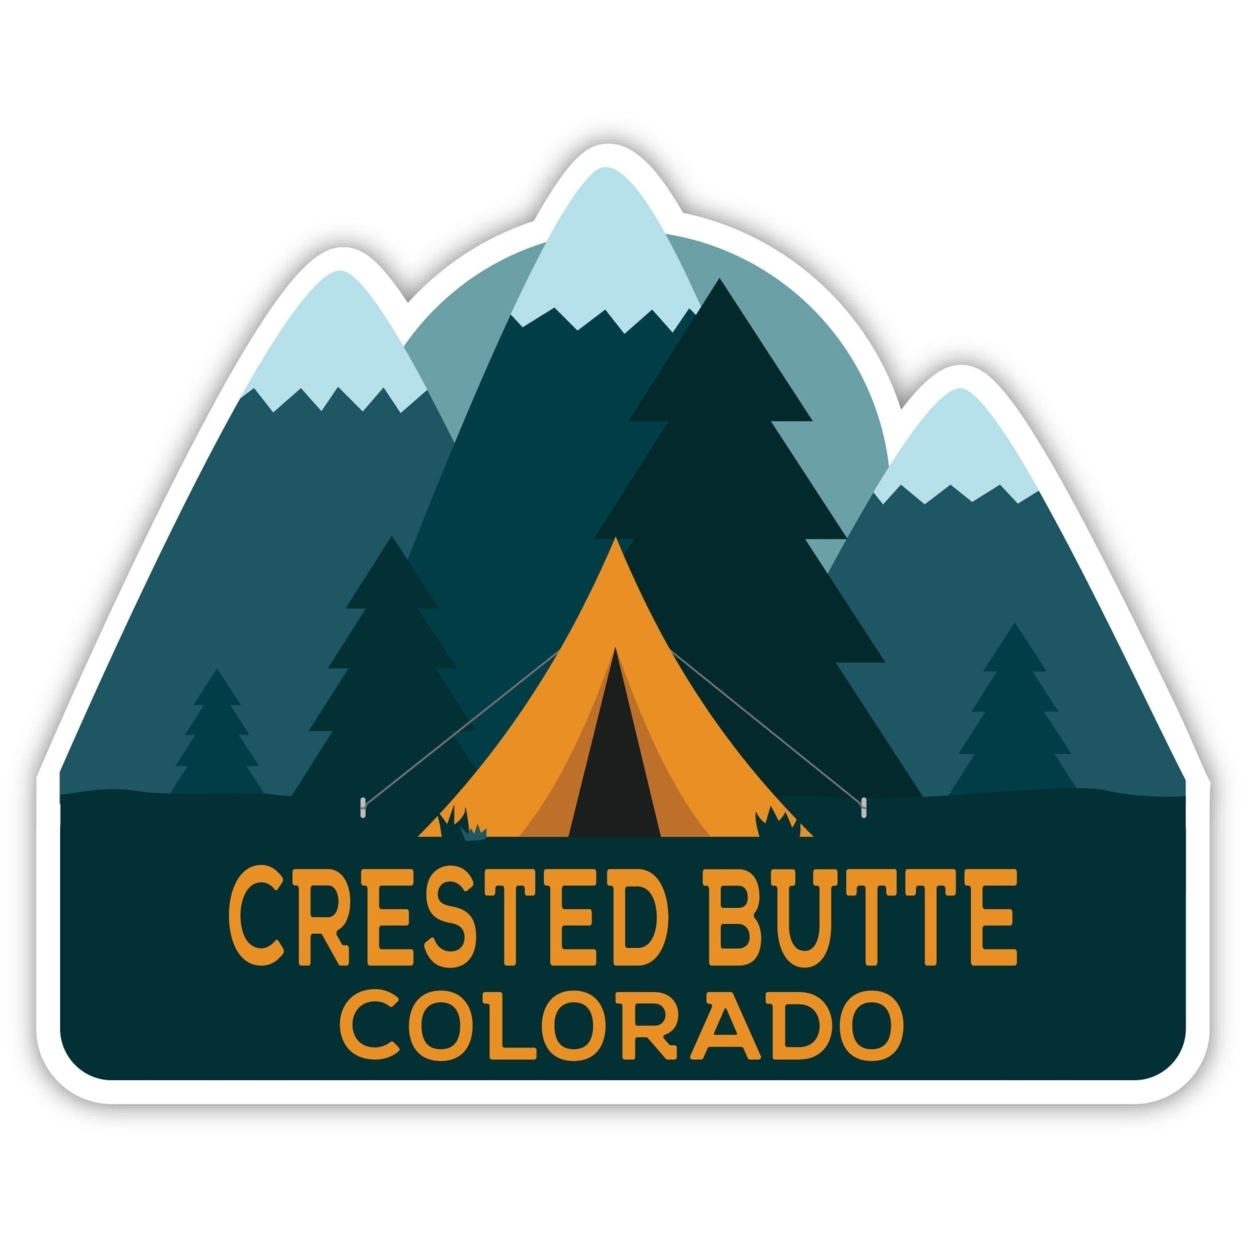 Crested Butte Colorado Souvenir Decorative Stickers (Choose Theme And Size) - 4-Pack, 4-Inch, Tent